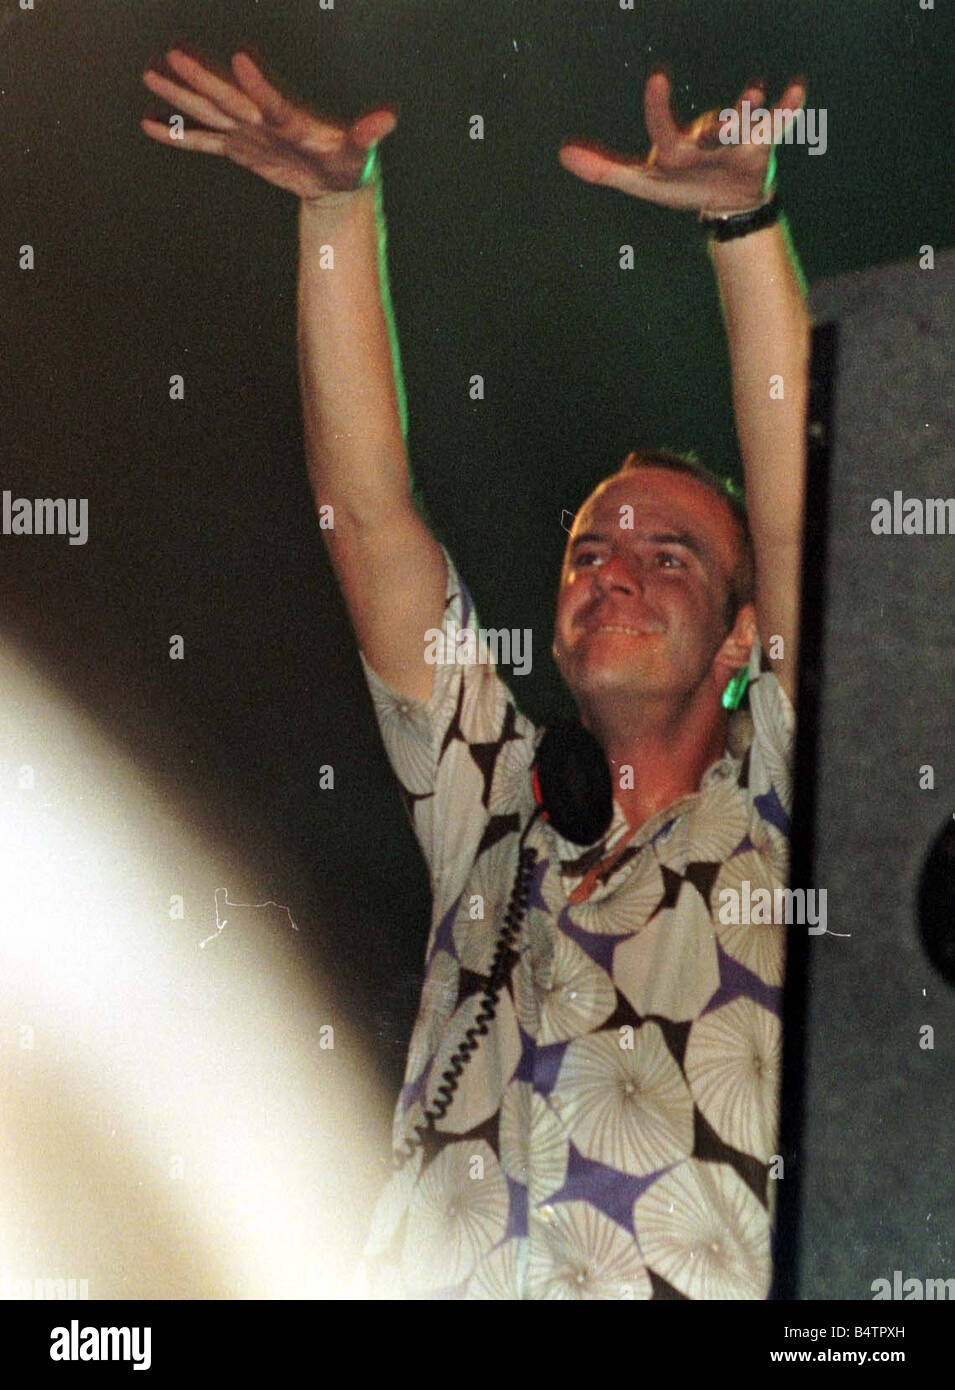 Norman Cook T in the Park concert 11th July 1999 open air concert Balado Airfield Kinross Norman Cook aka Fat Boy Slim disc jockey dj at concert Stock Photo